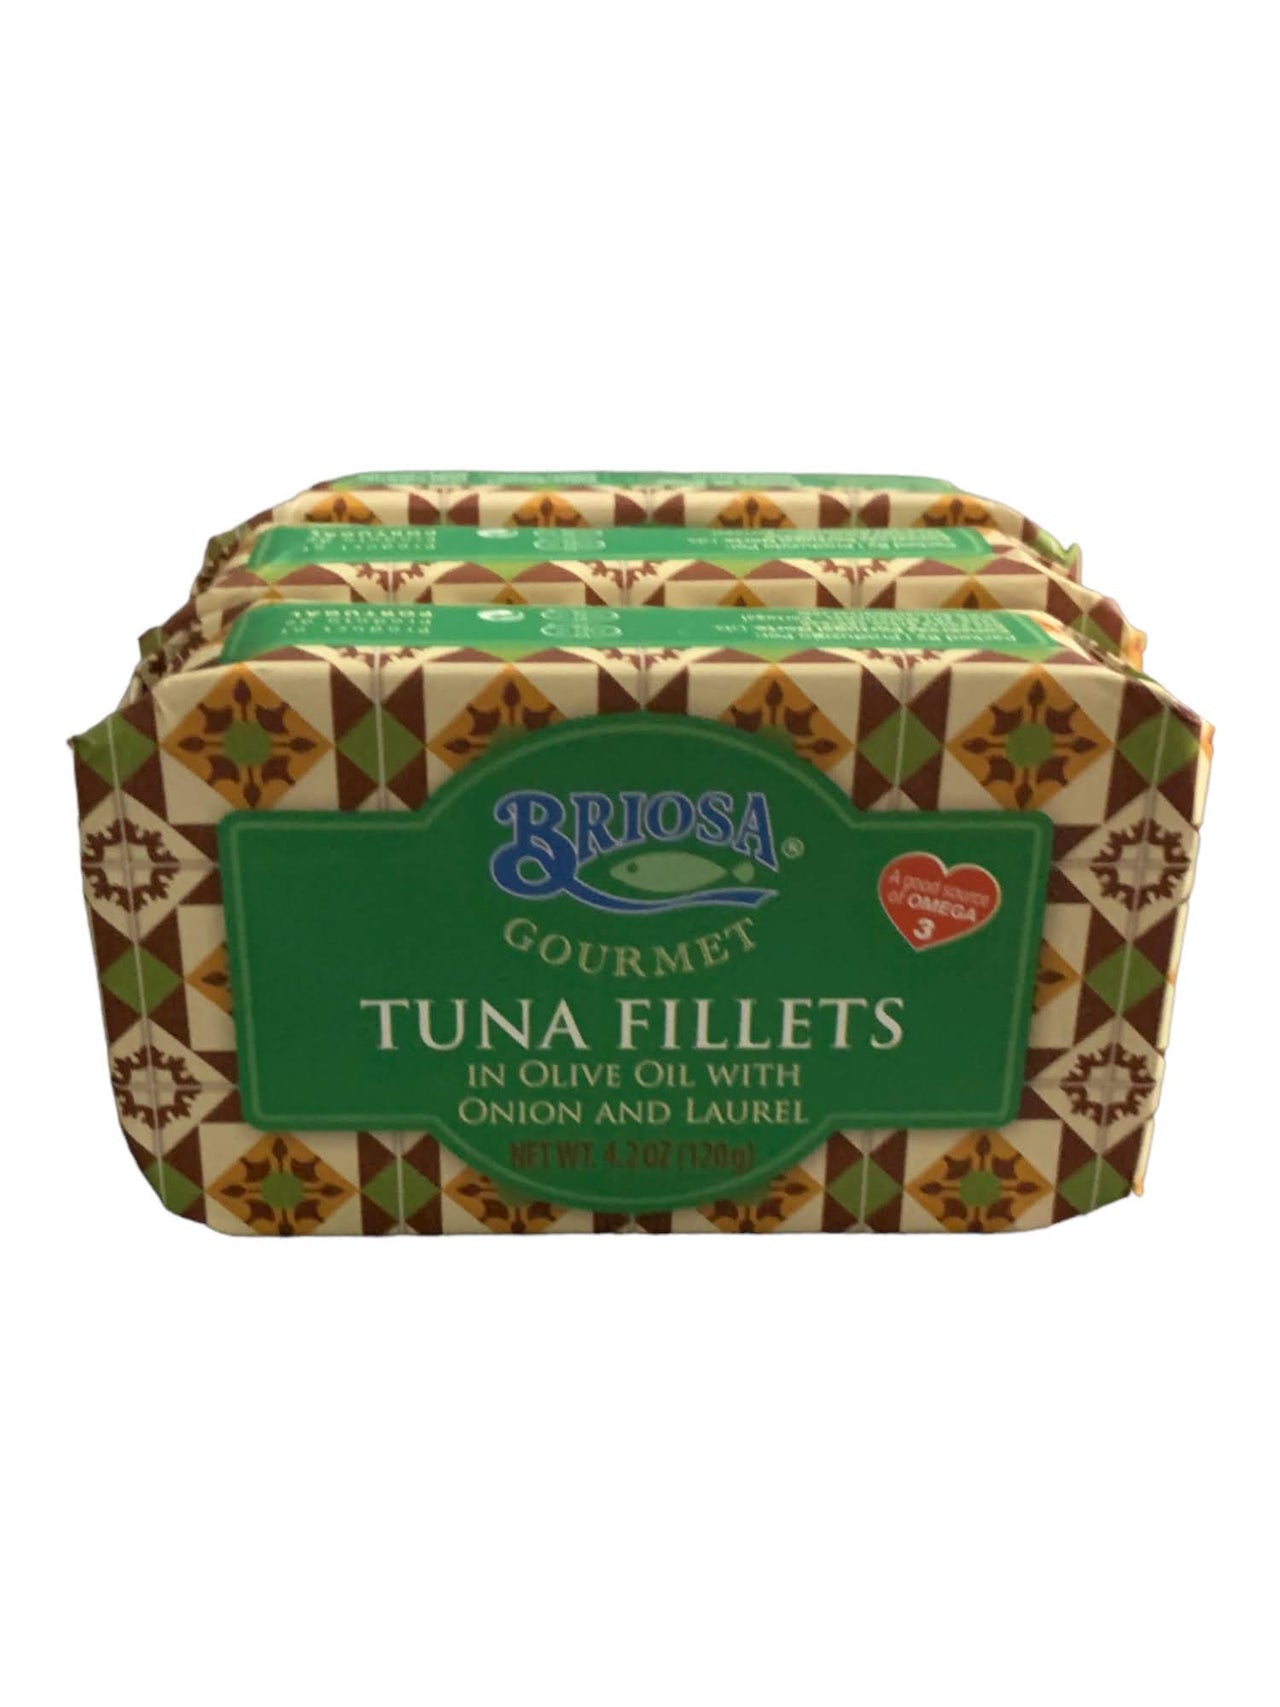 Briosa Gourmet Tuna Fillets in Olive Oil with Onion and Laurel - 3 Pack